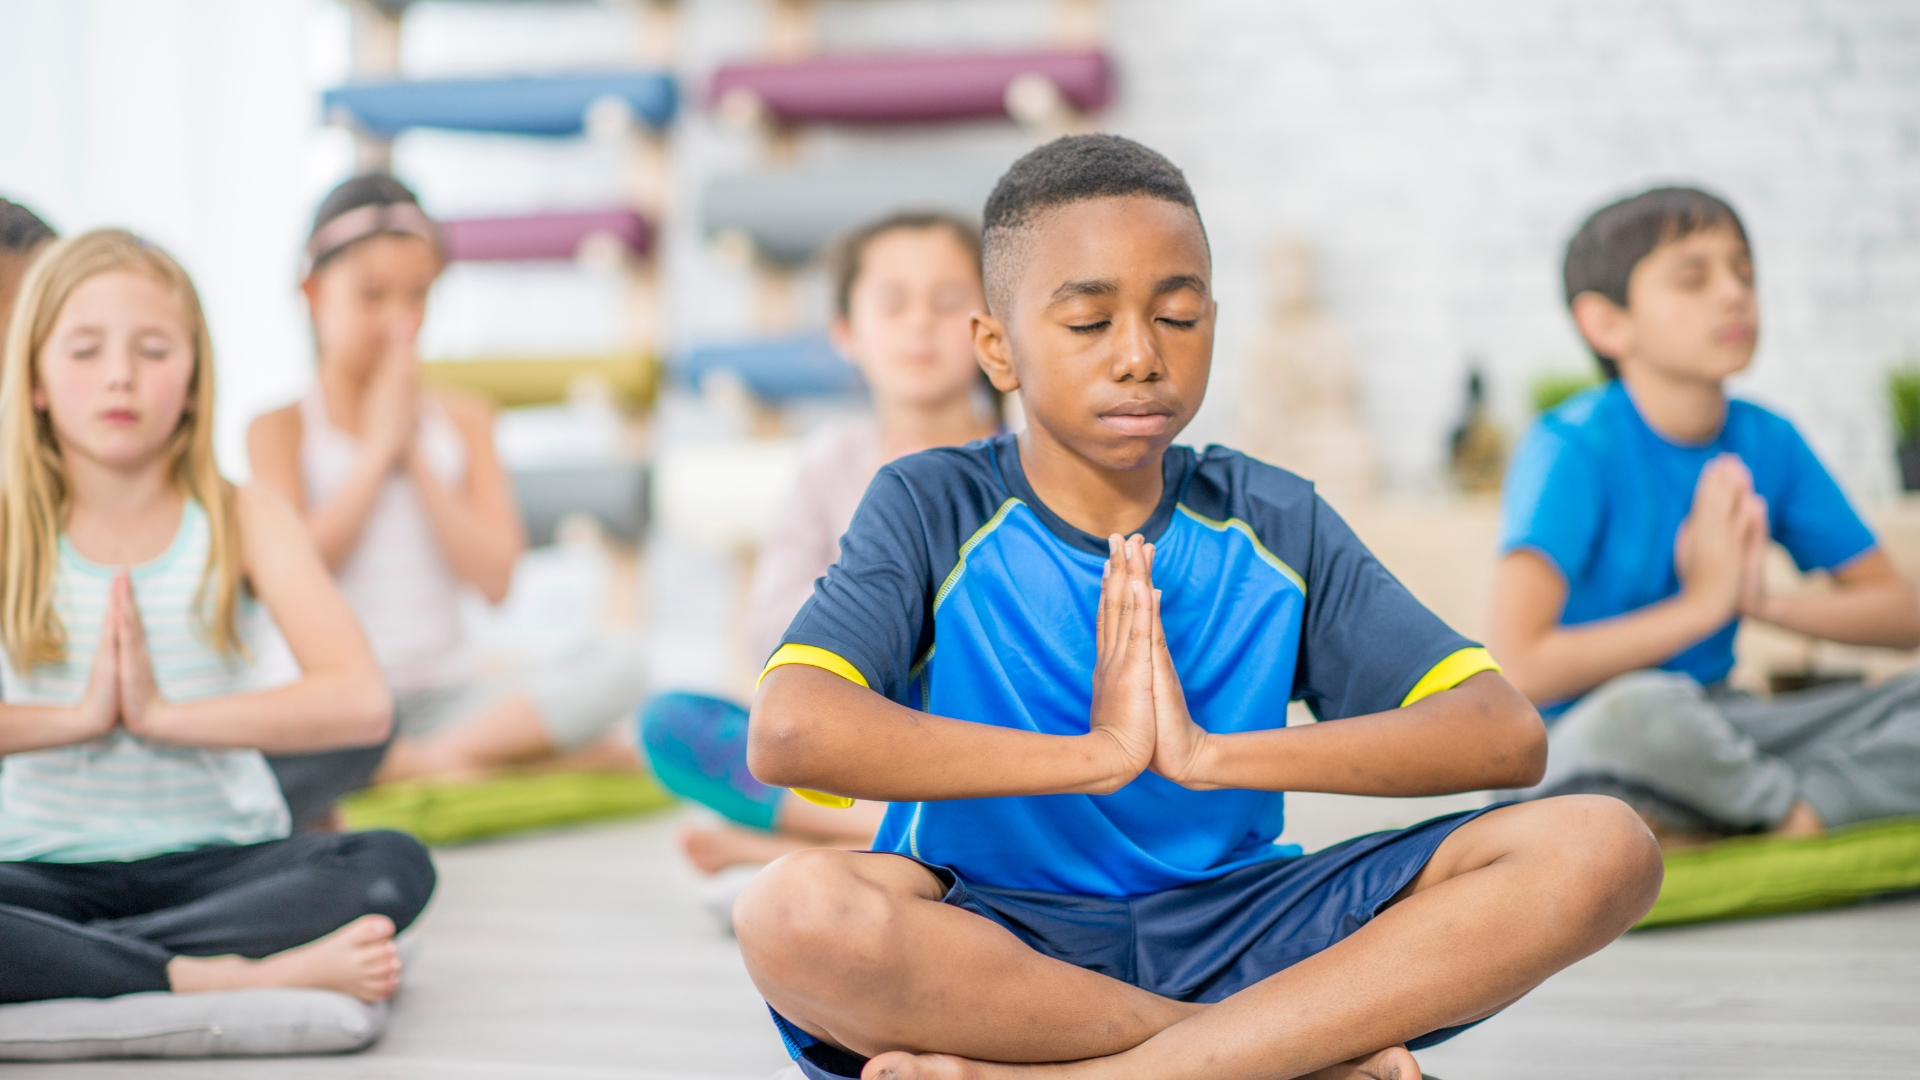 How Does Yoga Promote A Positive Body Image And Self-Esteem In Kids?